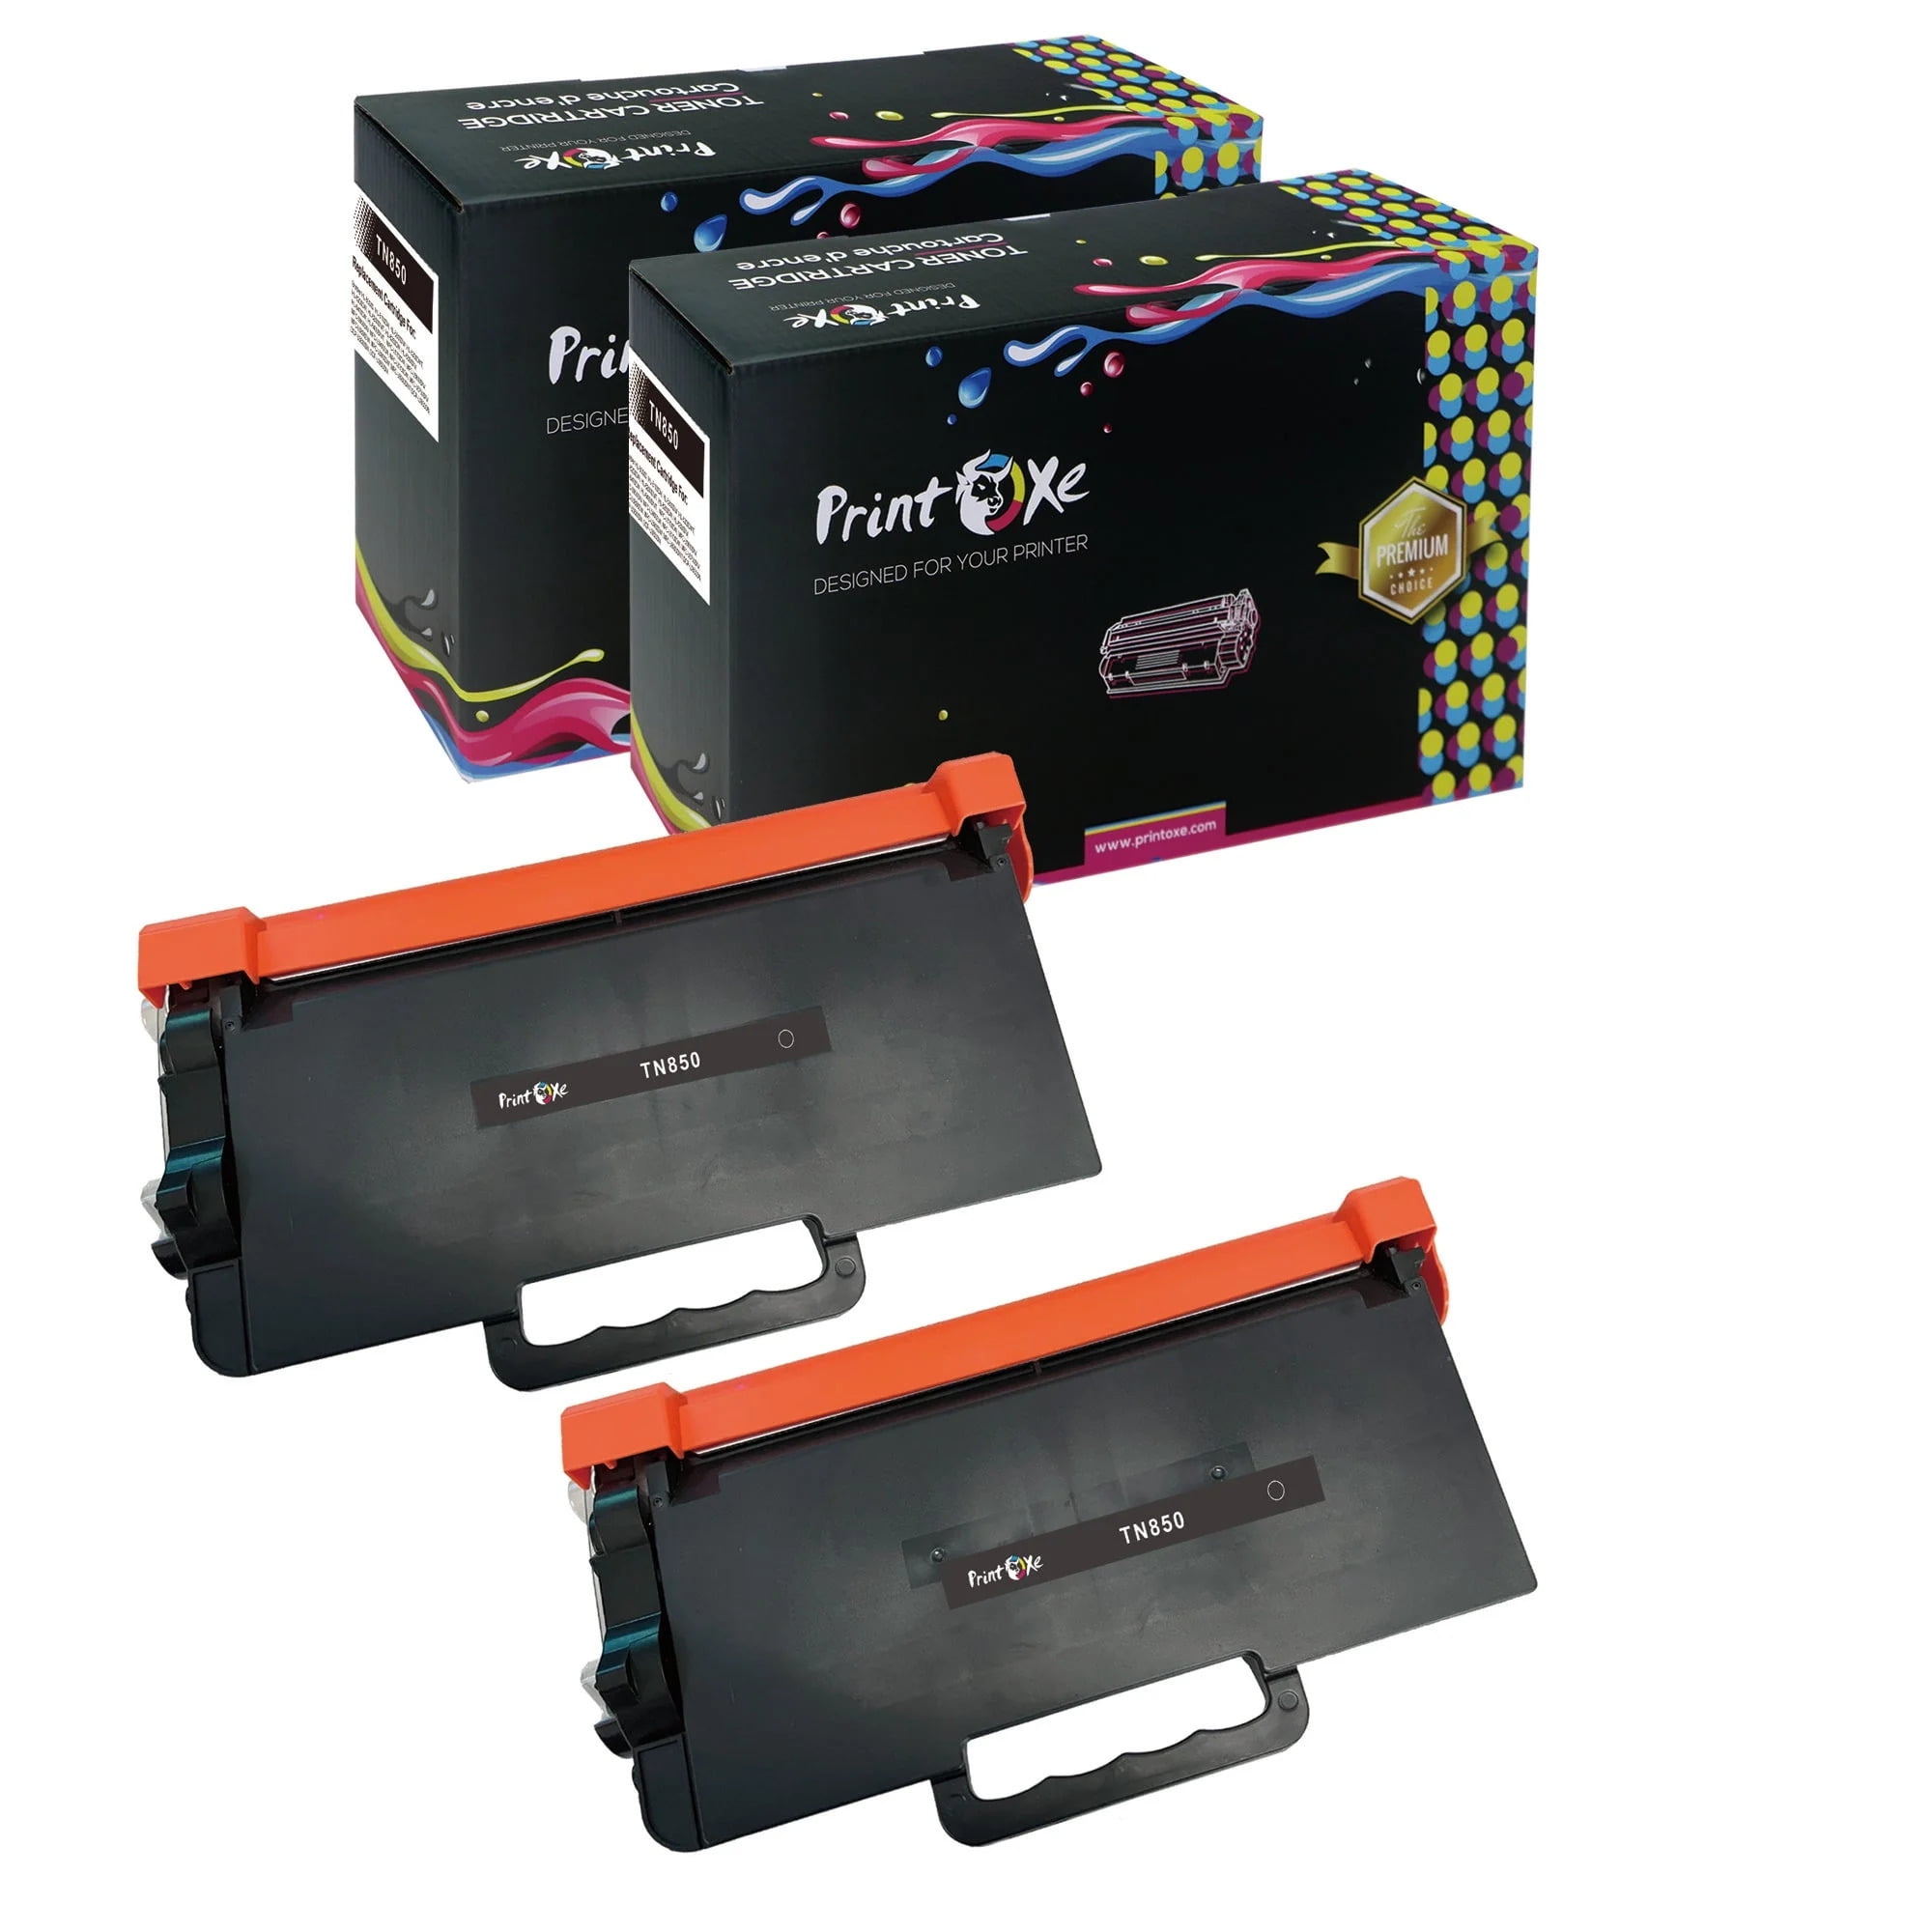  Brother TN-850 DCP-L5500 L5600 L5650 HL-L5000D L5100 L5200  L5200 Toner Cartridge (Black) in Retail Packaging - 2 Pack : Office Products